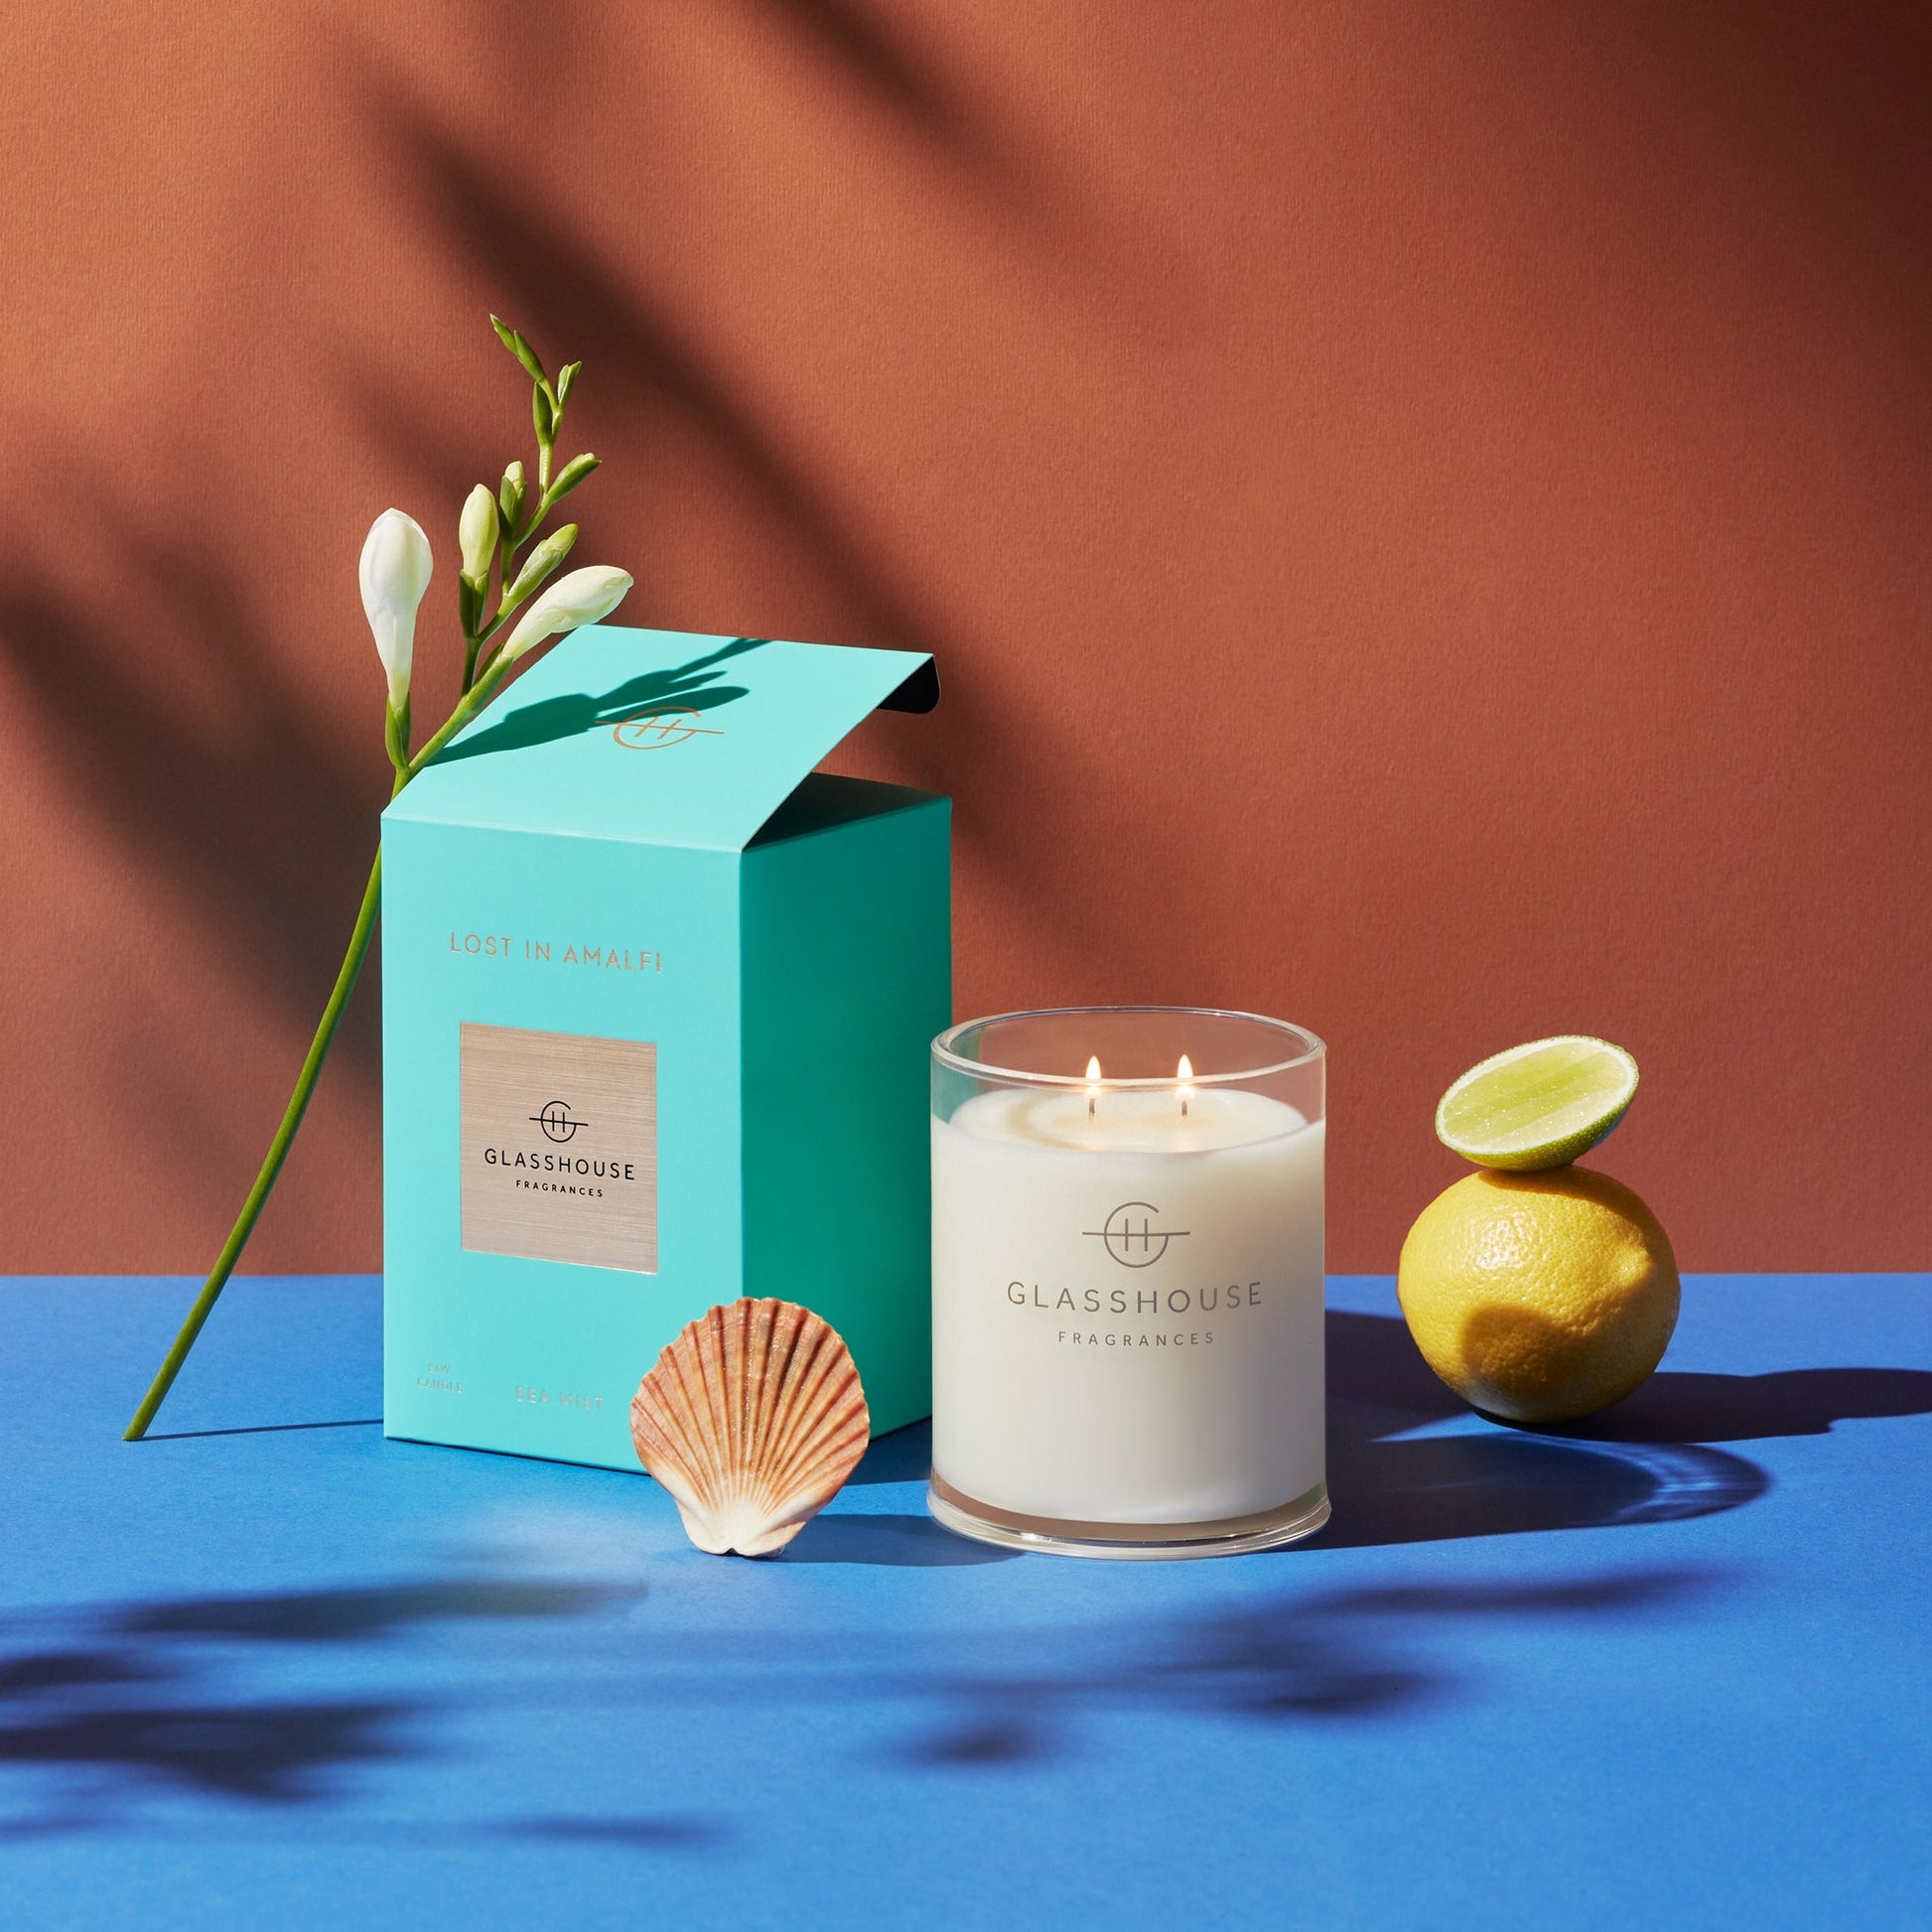 Lost In Amalfi Triple Scented Candle jar displayed next to the turquoise box, lemons, sea shell, and sprig of flowers against a blue and mauve background